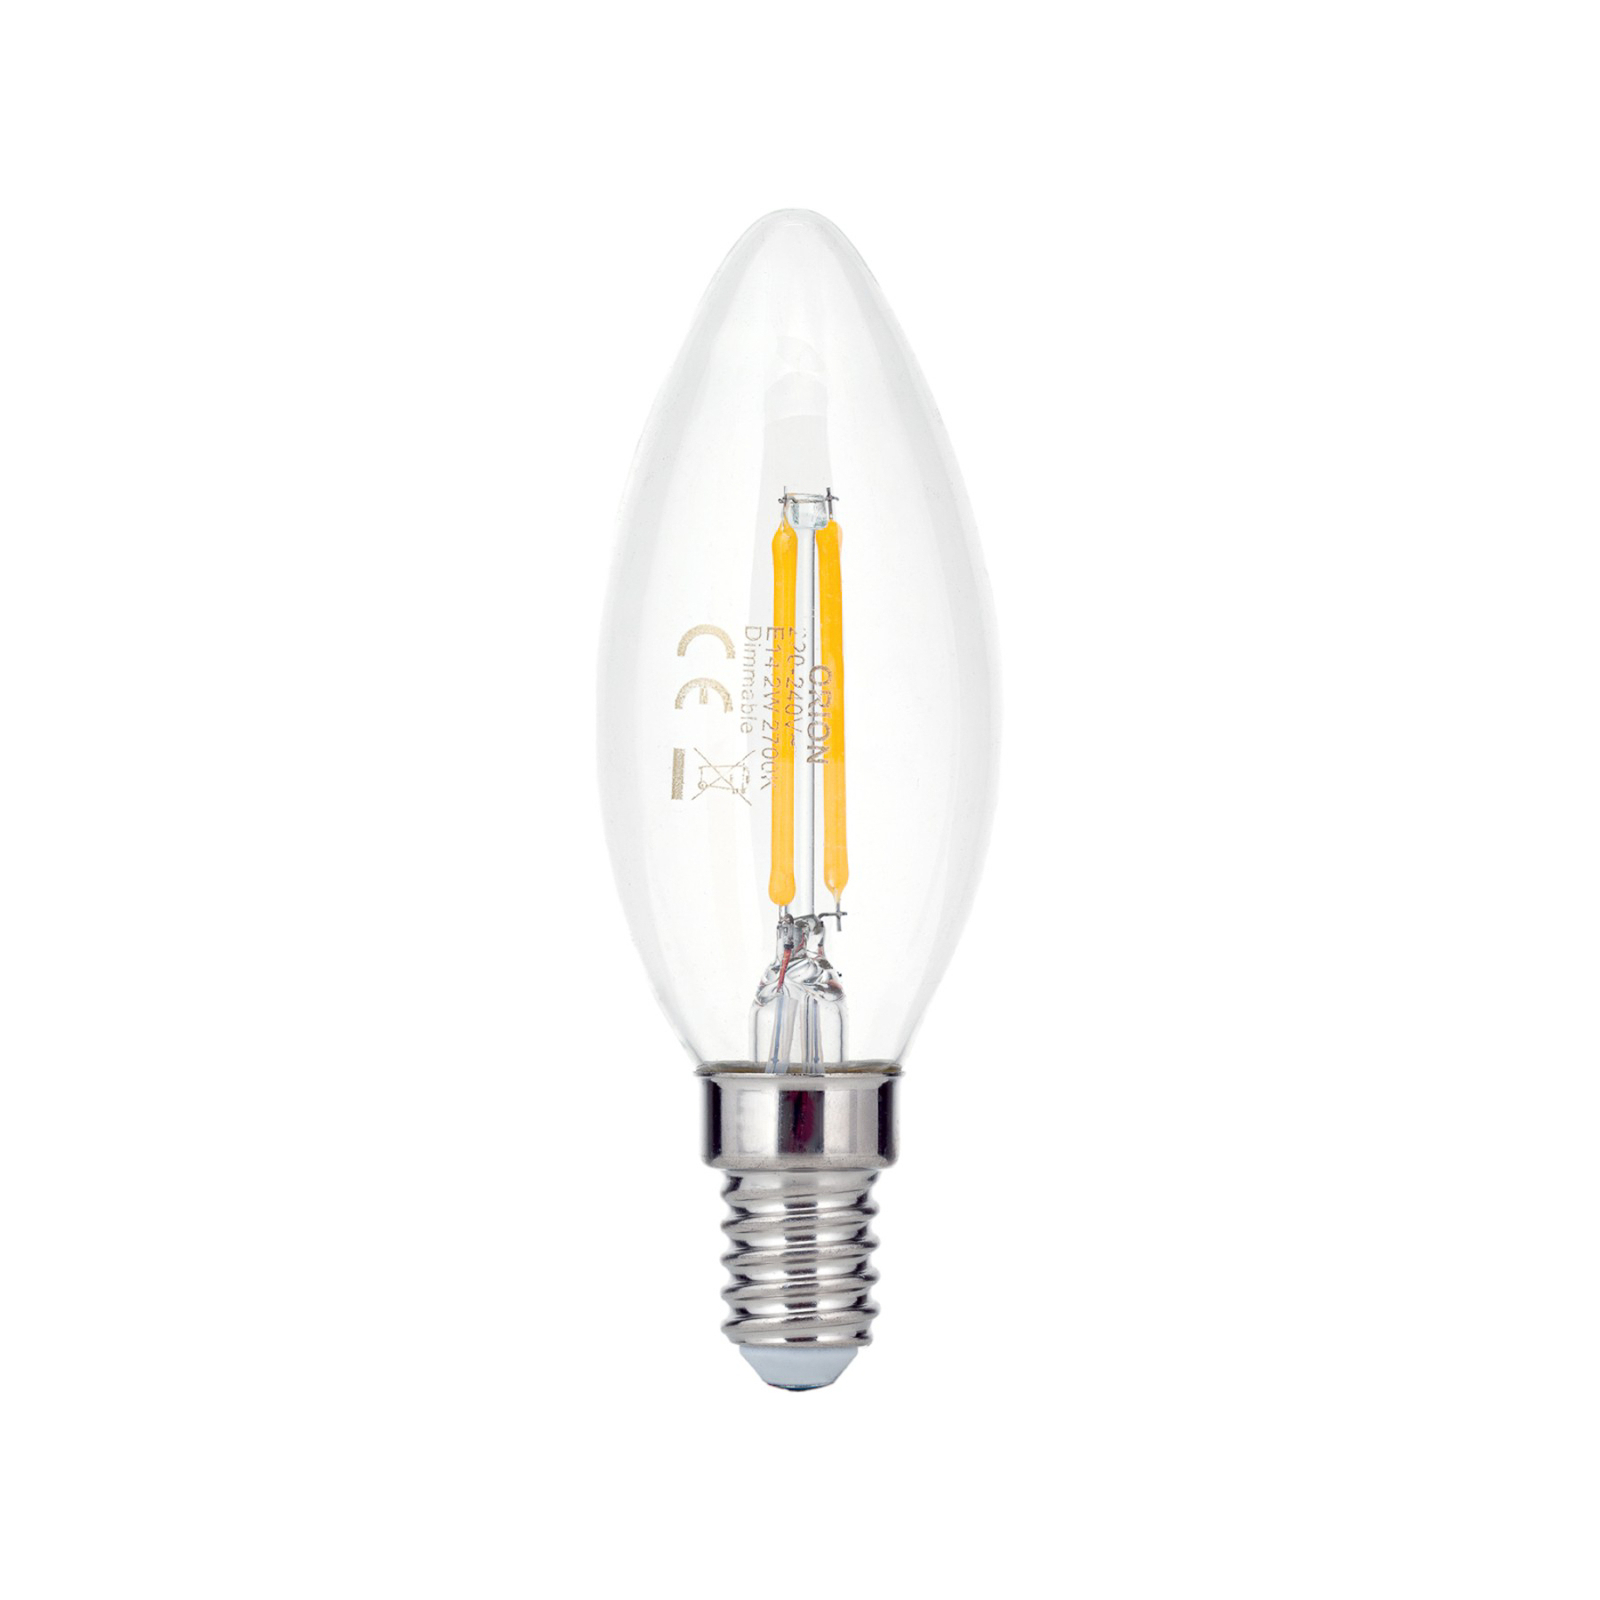 LED bulb Filament E14 C35 clear 2W 827 180lm dimmable